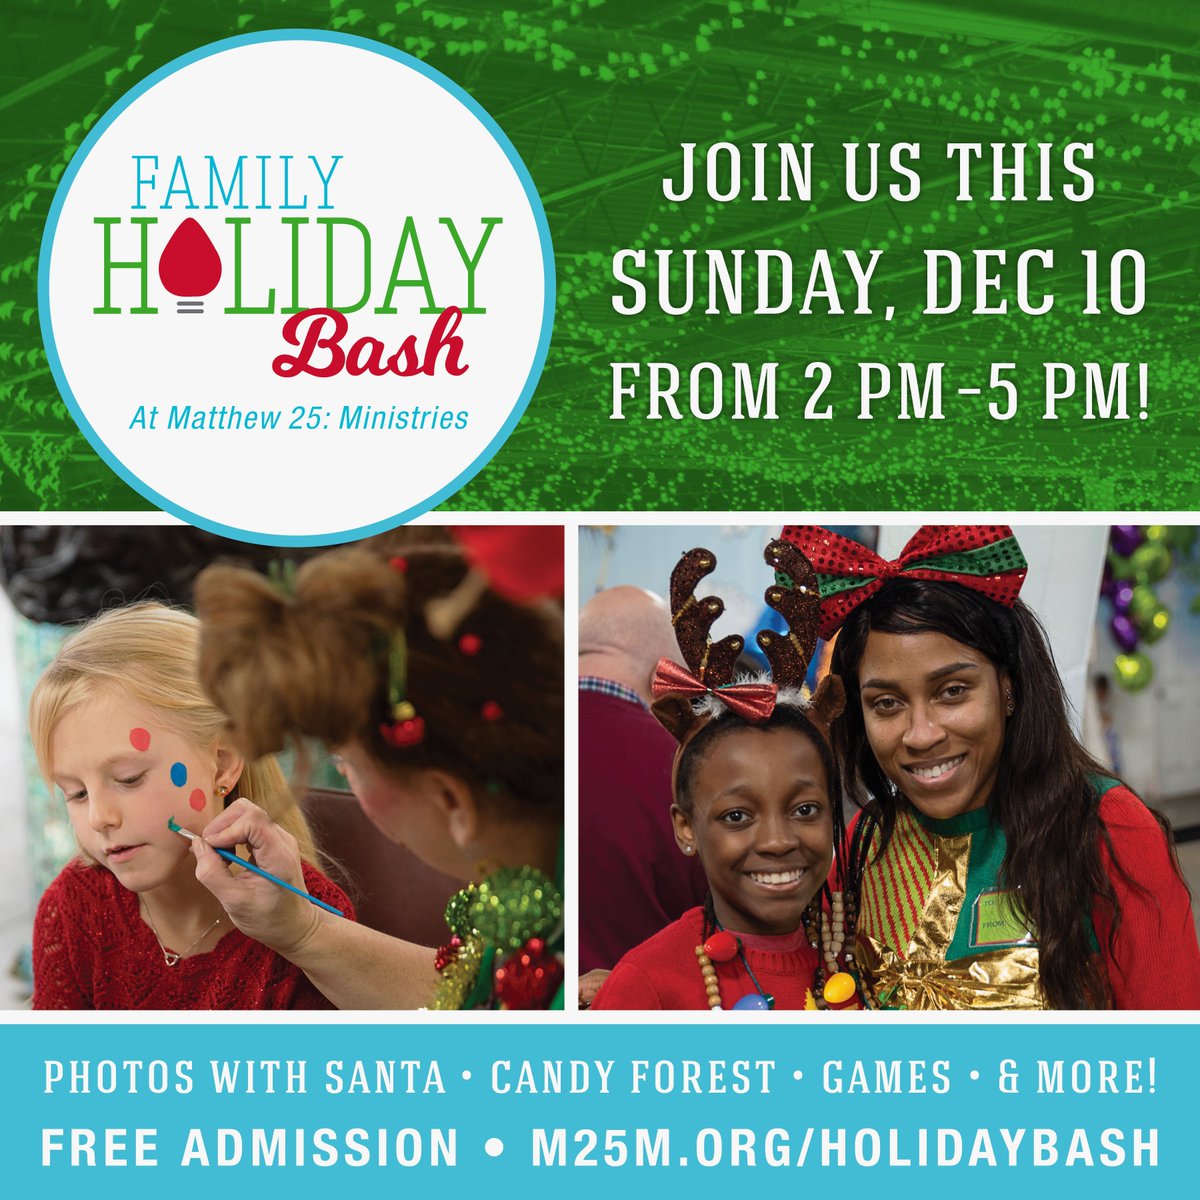 Join us for our Family Holiday Bash this Sunday, Dec 10 from 2 PM - 5 PM 🎄 Admission is free, with donations being accepted to benefit A Kid Again's work with children with life-threatening conditions and their families. Visit m25m.org/event/holidayb… to learn more.